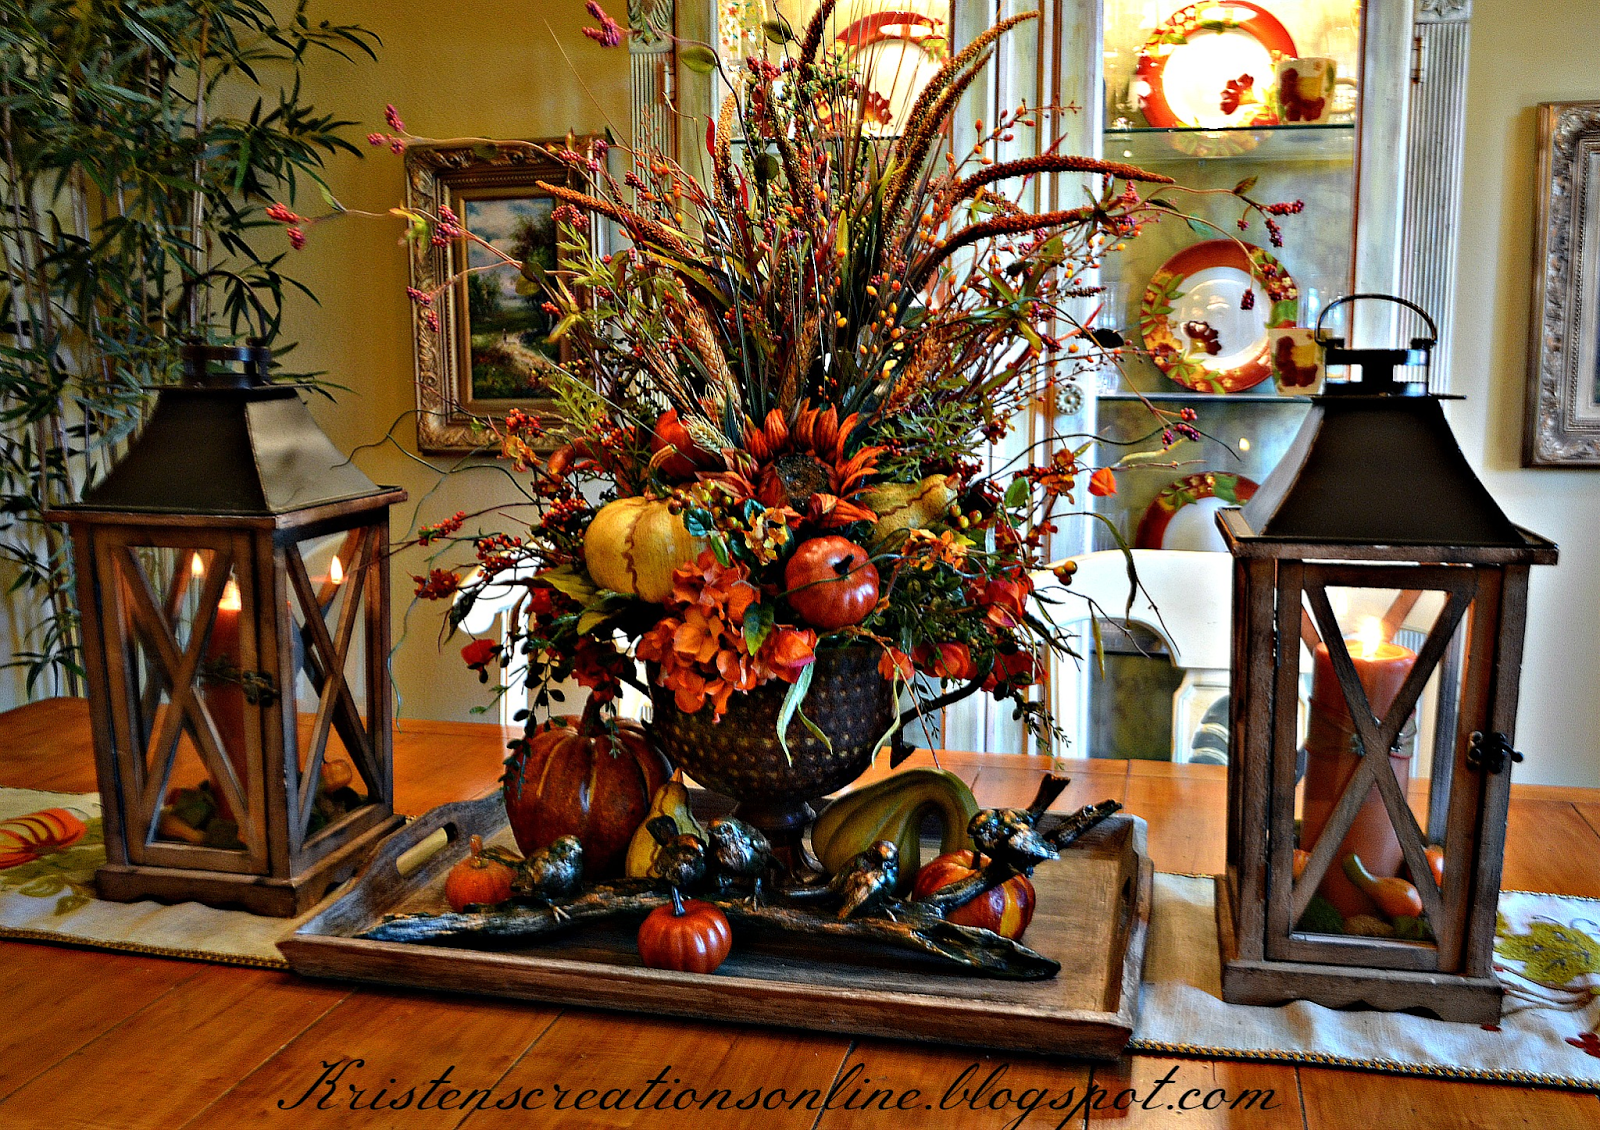 Kristen's Creations: Fall Around the House